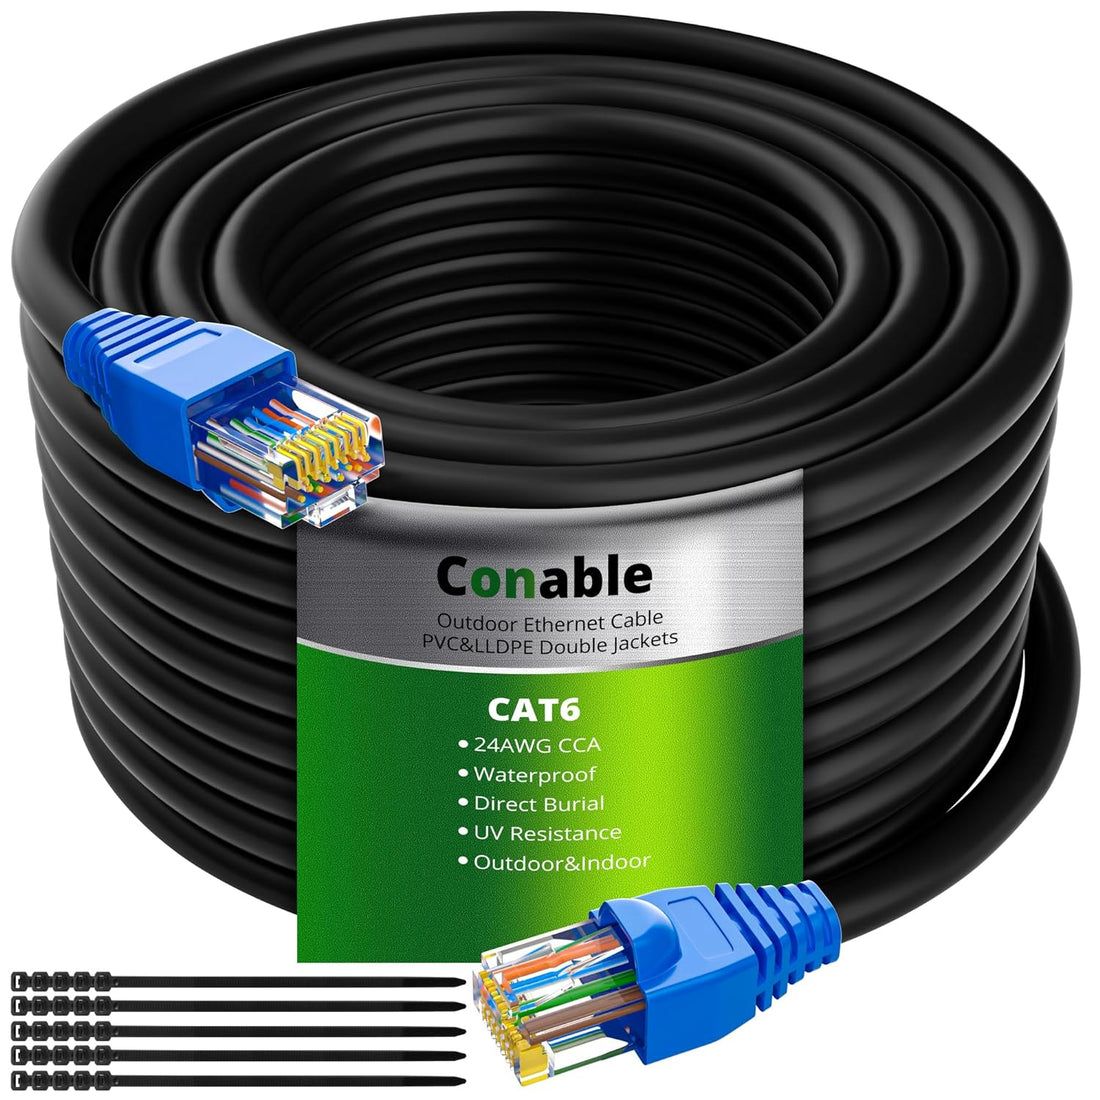 Cat6 Outdoor Ethernet Cable Heavy Duty 300 Feet Cat 6 Network Internet (25ft to 300ft),Faster Than Cat5e,Waterproof UV LLDPE Douable Jacket for in Wall,Direct Burial,POE Camera with 25 Ties- 300 ft